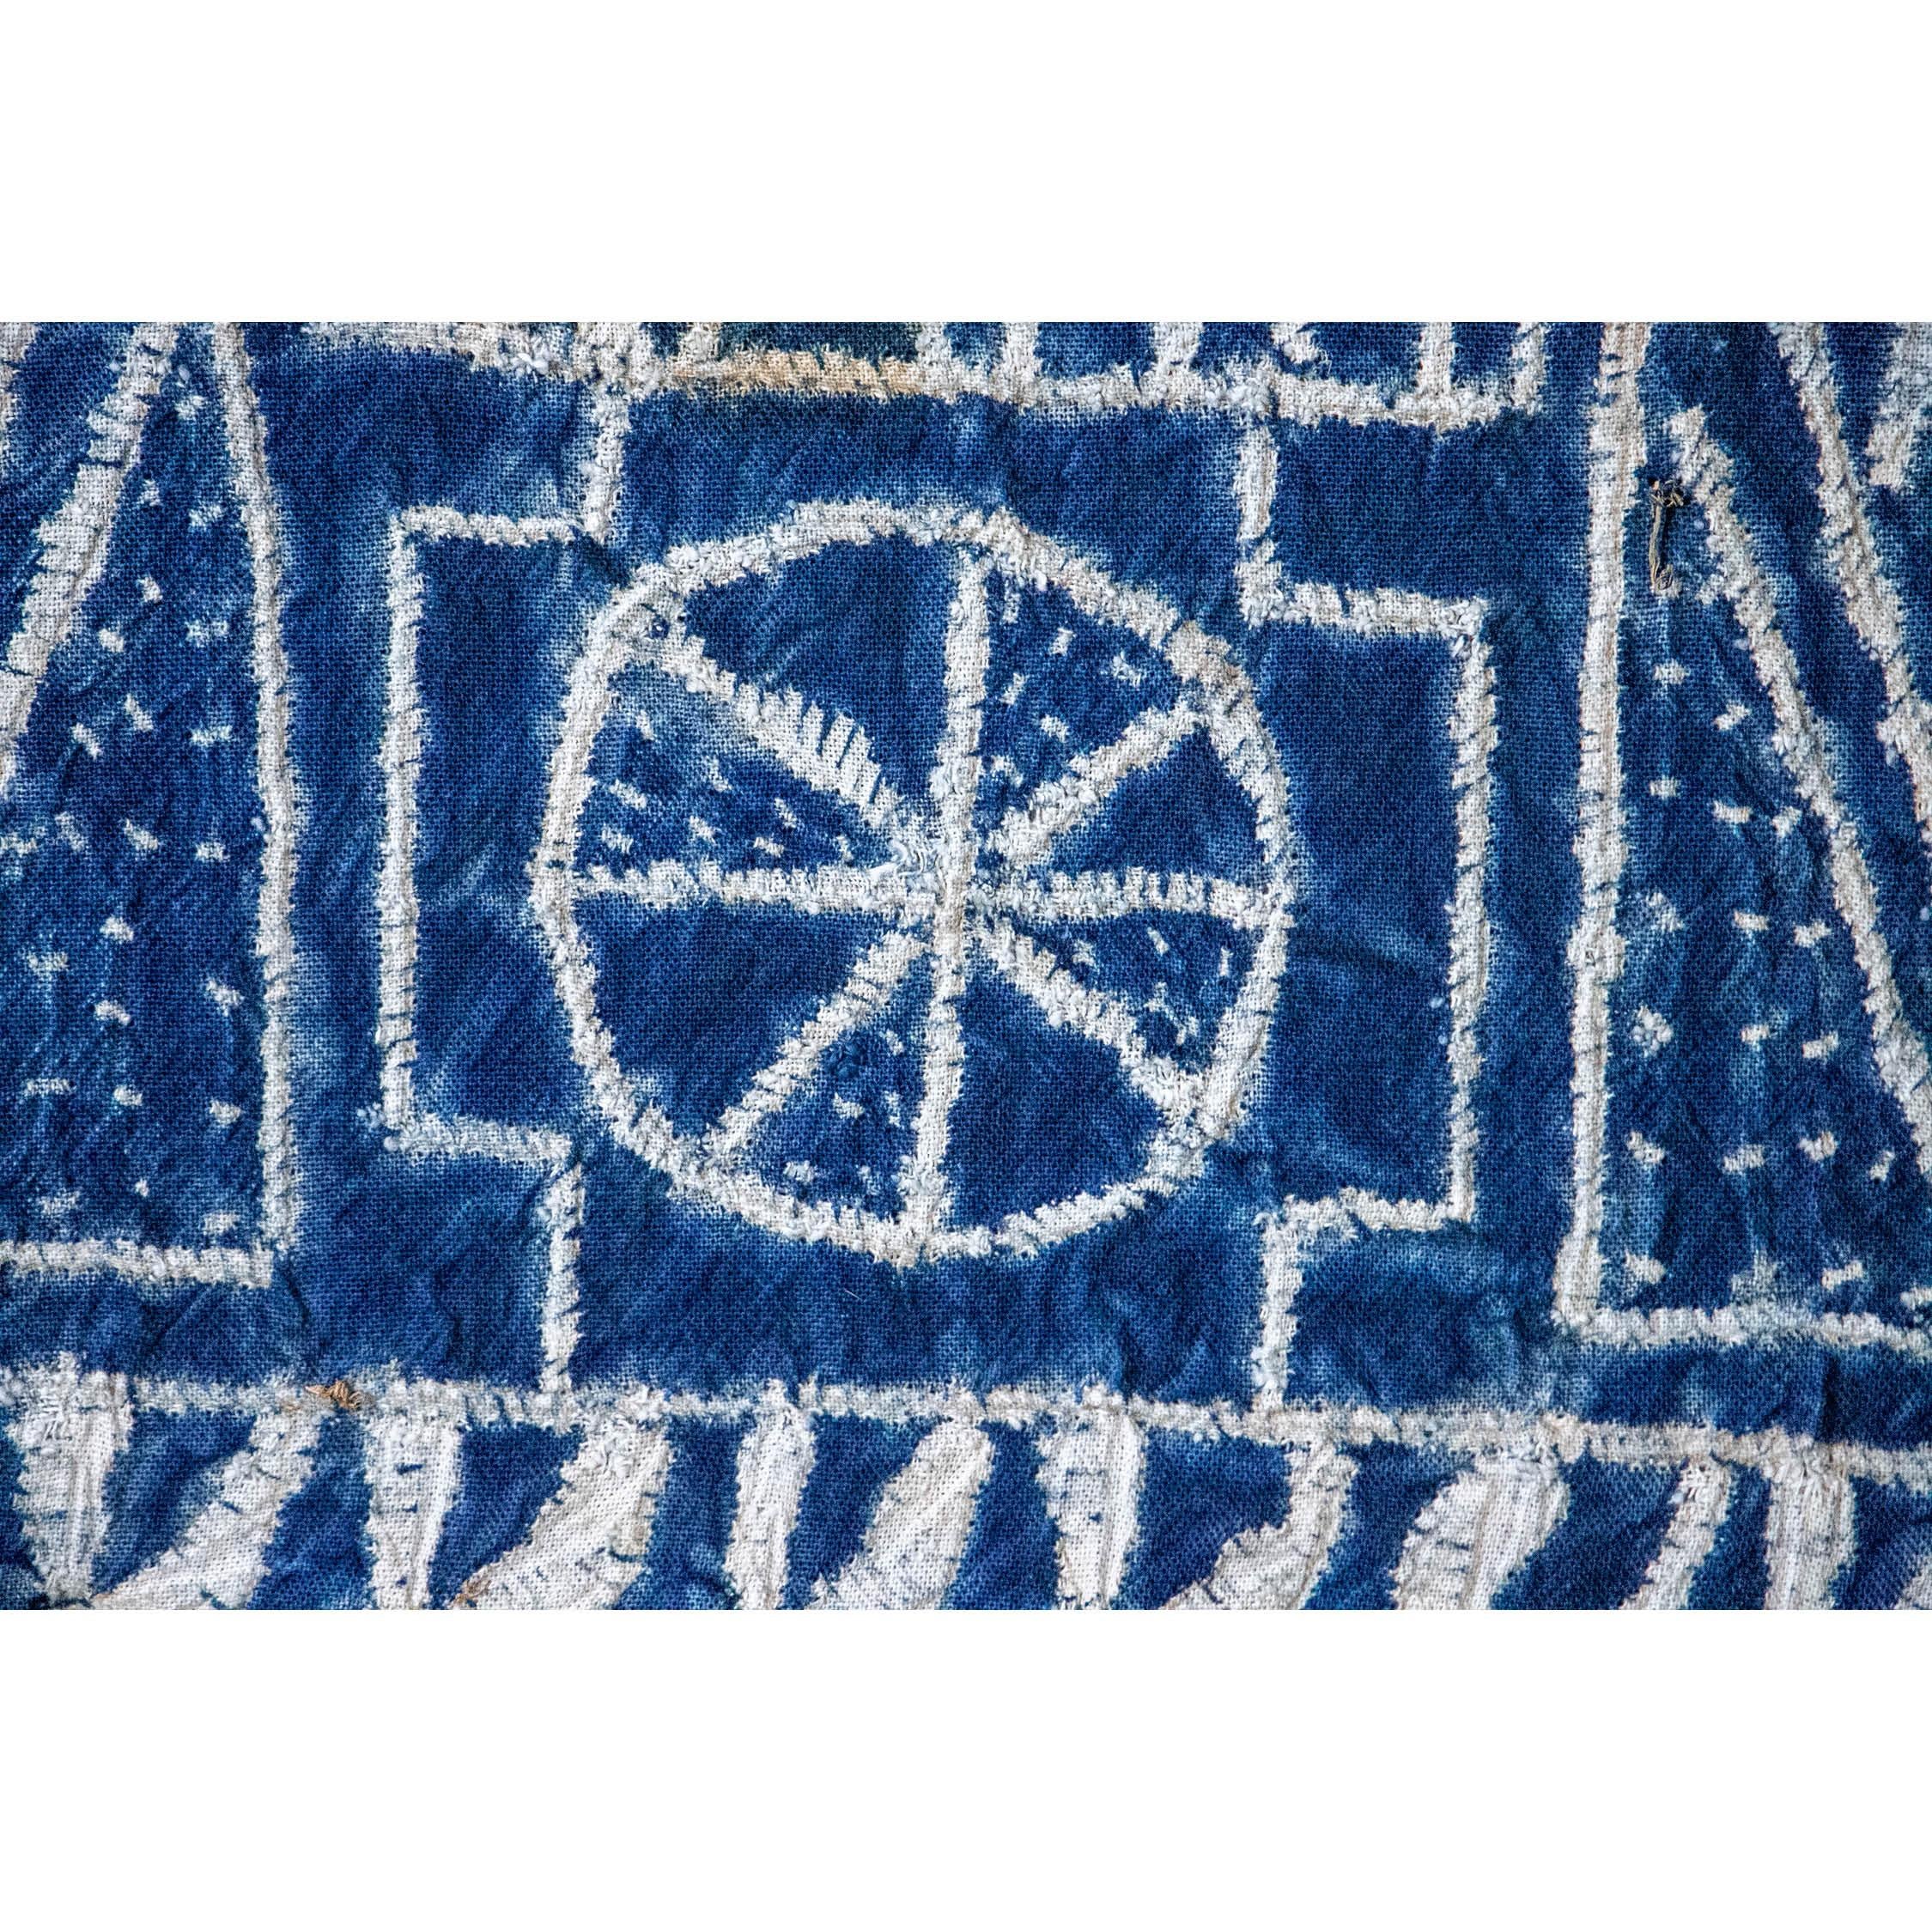 20th Century Large Vintage ‘Ndop’ Indigo Cloth or Textile Mid 20th C or Earlier   For Sale